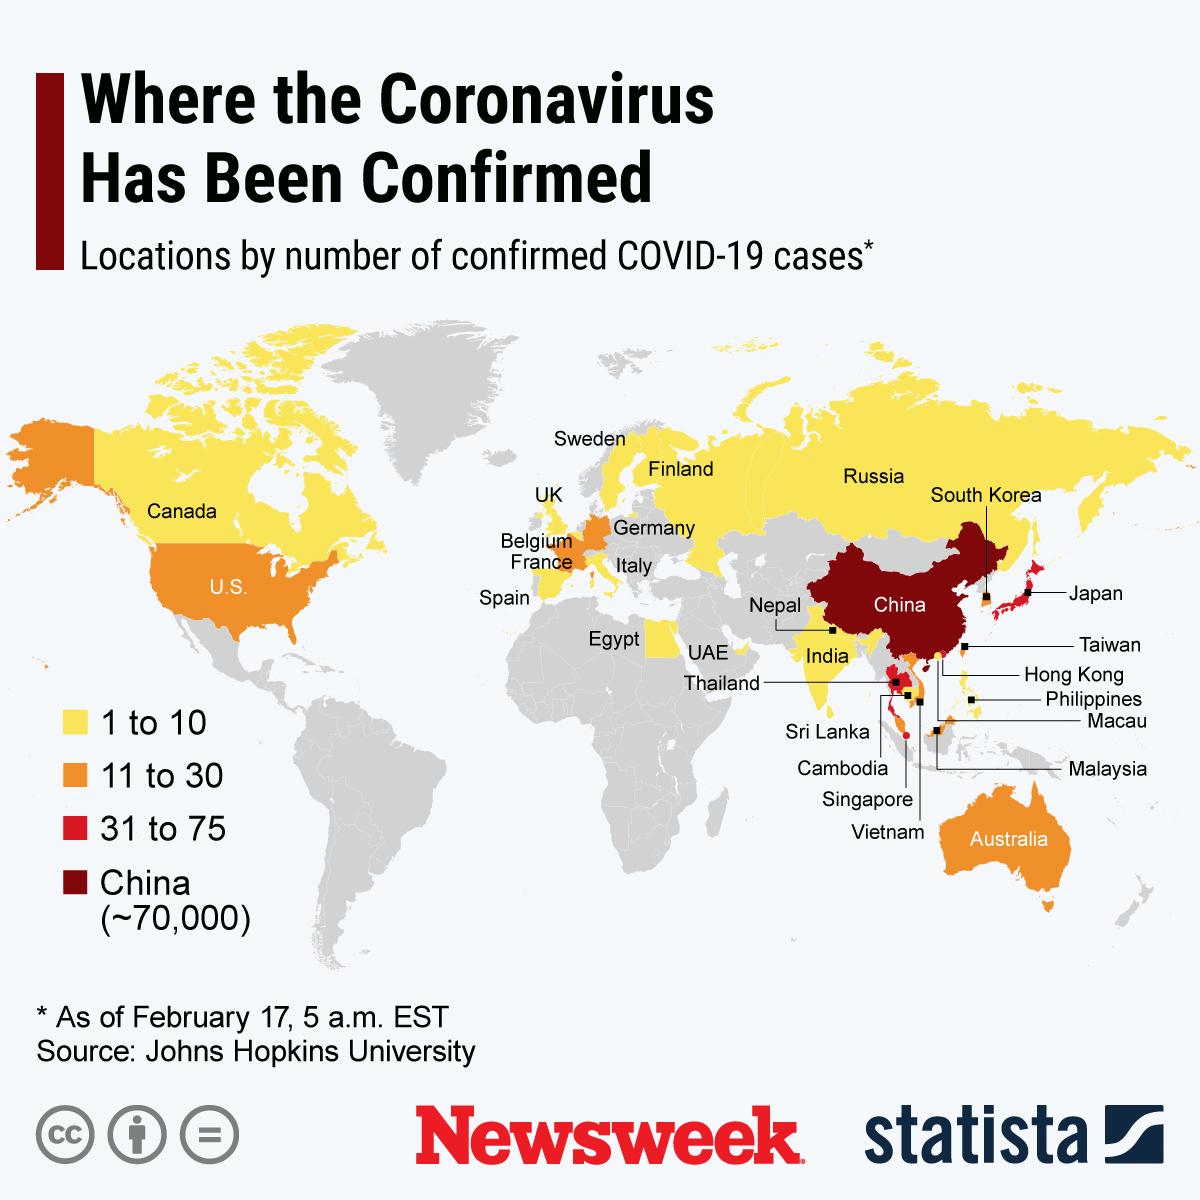 Coronavirus Update Map Shows More Than 71,000 Confirmed Cases in 26